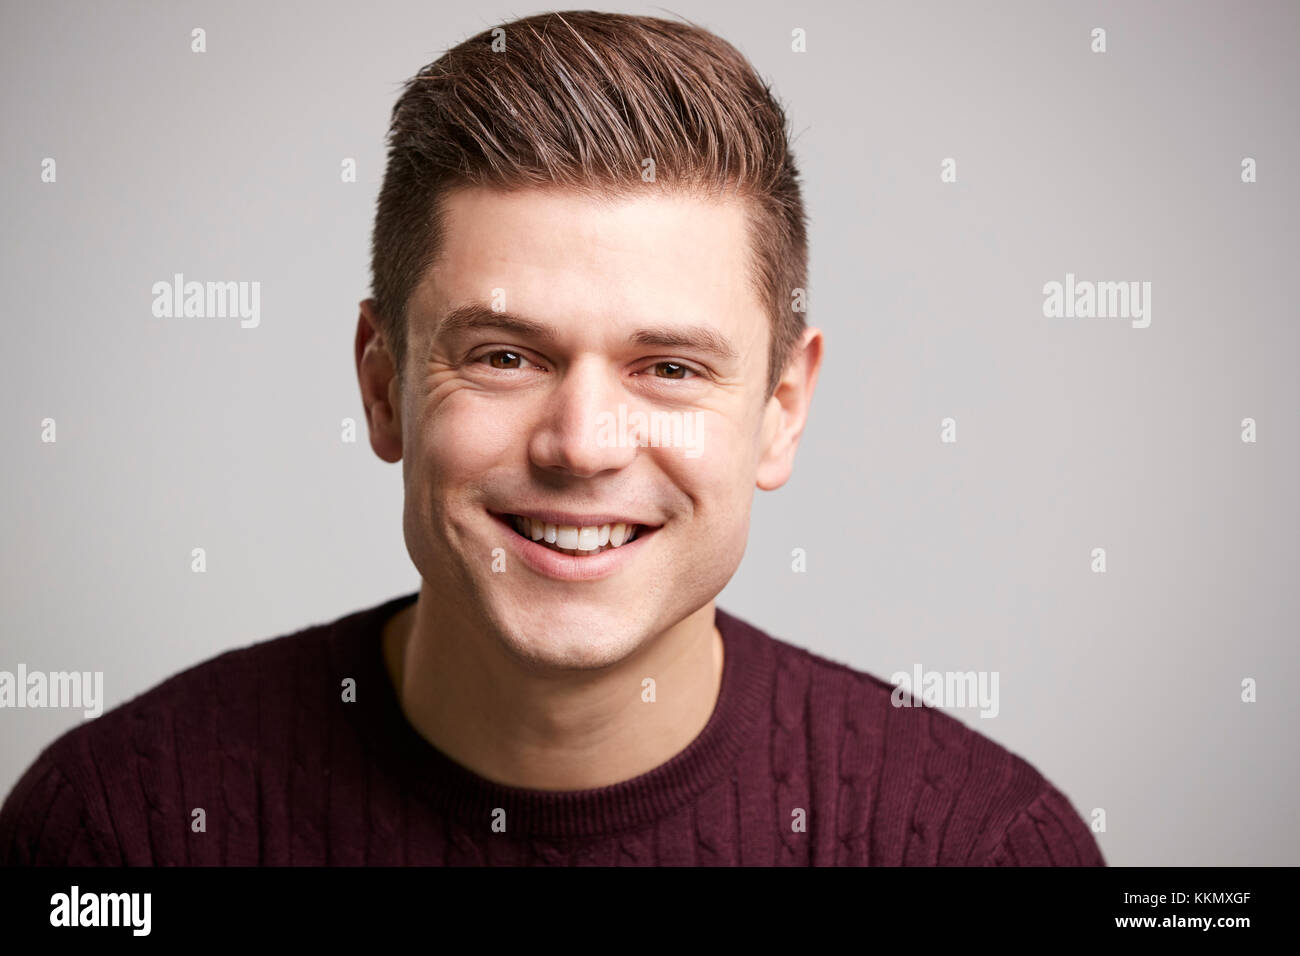 Portrait of a smiling young white man looking to camera Stock Photo